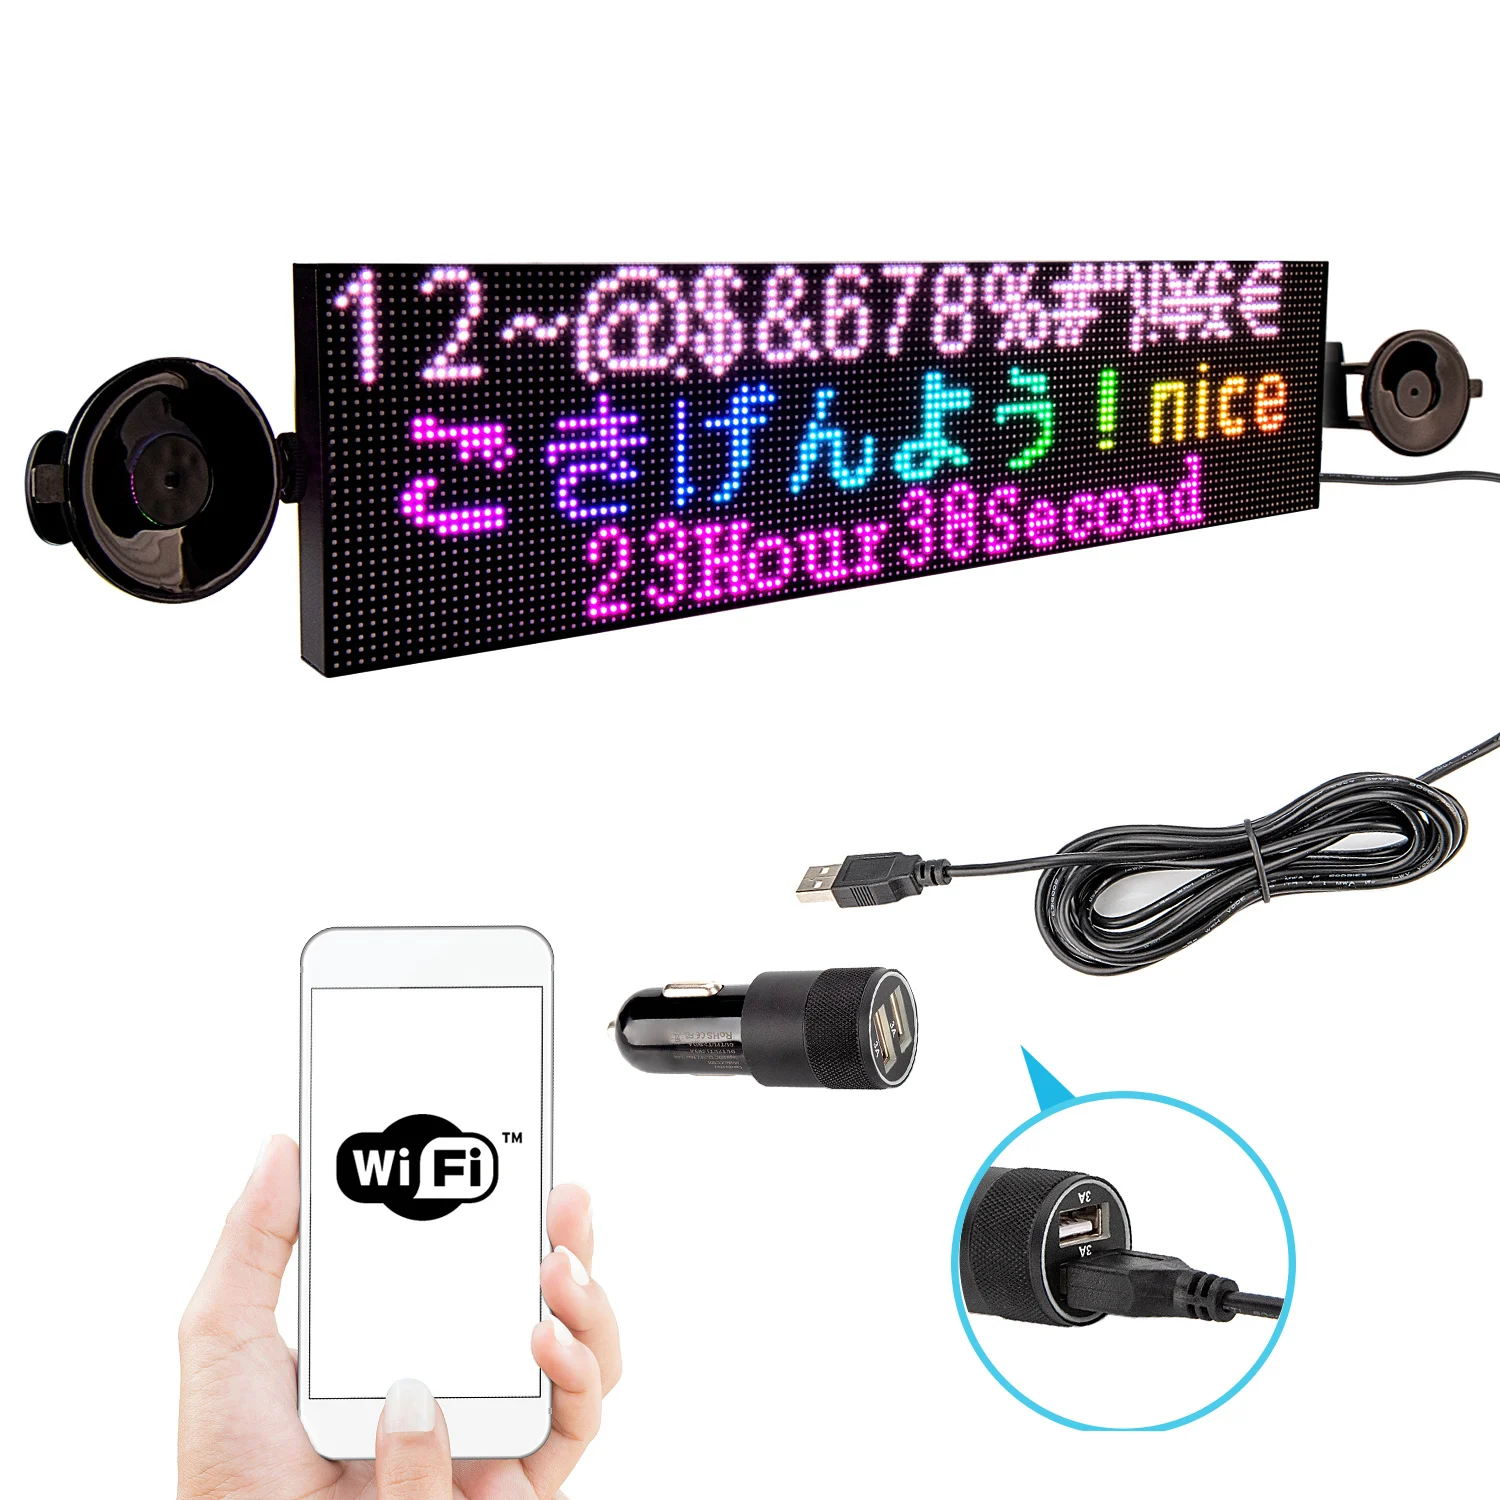 Leadleds P4 LED Sign Board Car Light WiFi Programmable RGB Full Color Scrolling Digital Message Led Advertising Display for Car